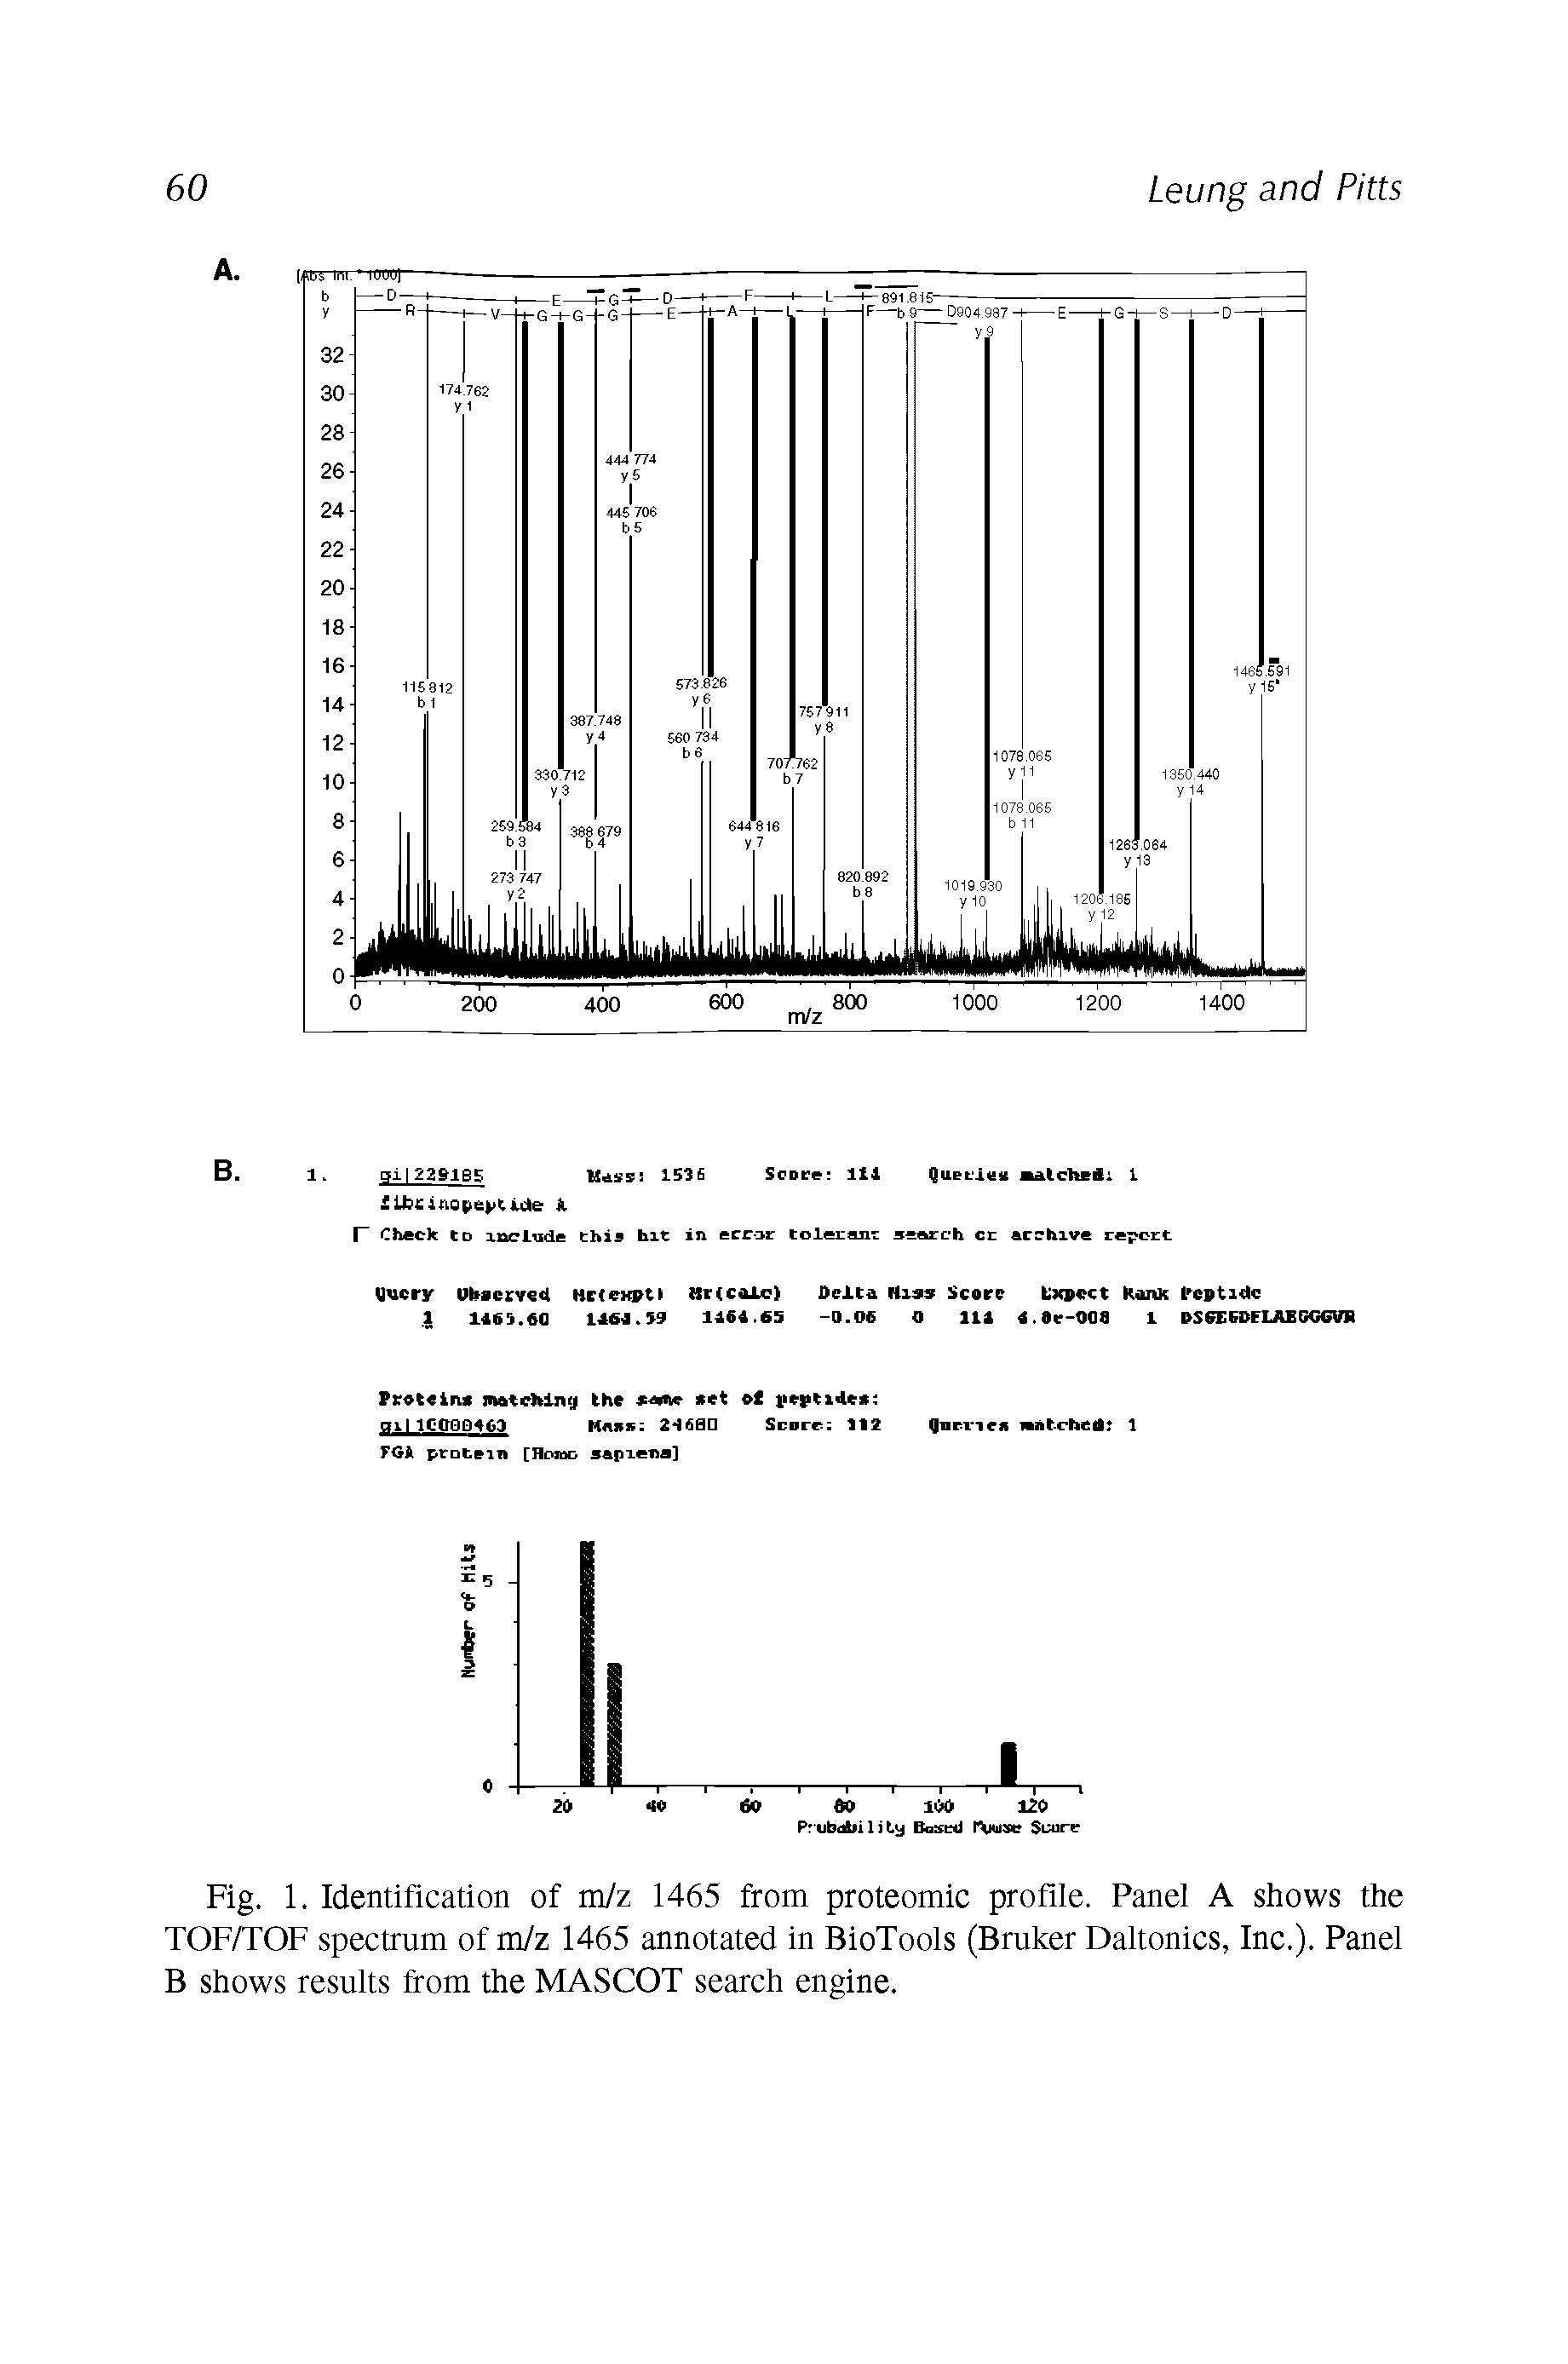 Fig. 1. Identification of m/z 1465 from proteomic profile. Panel A shows the TOF/TOF spectrum of m/z 1465 annotated in BioTools (Bruker Daltonics, Inc.). Panel B shows results from the MASCOT search engine.